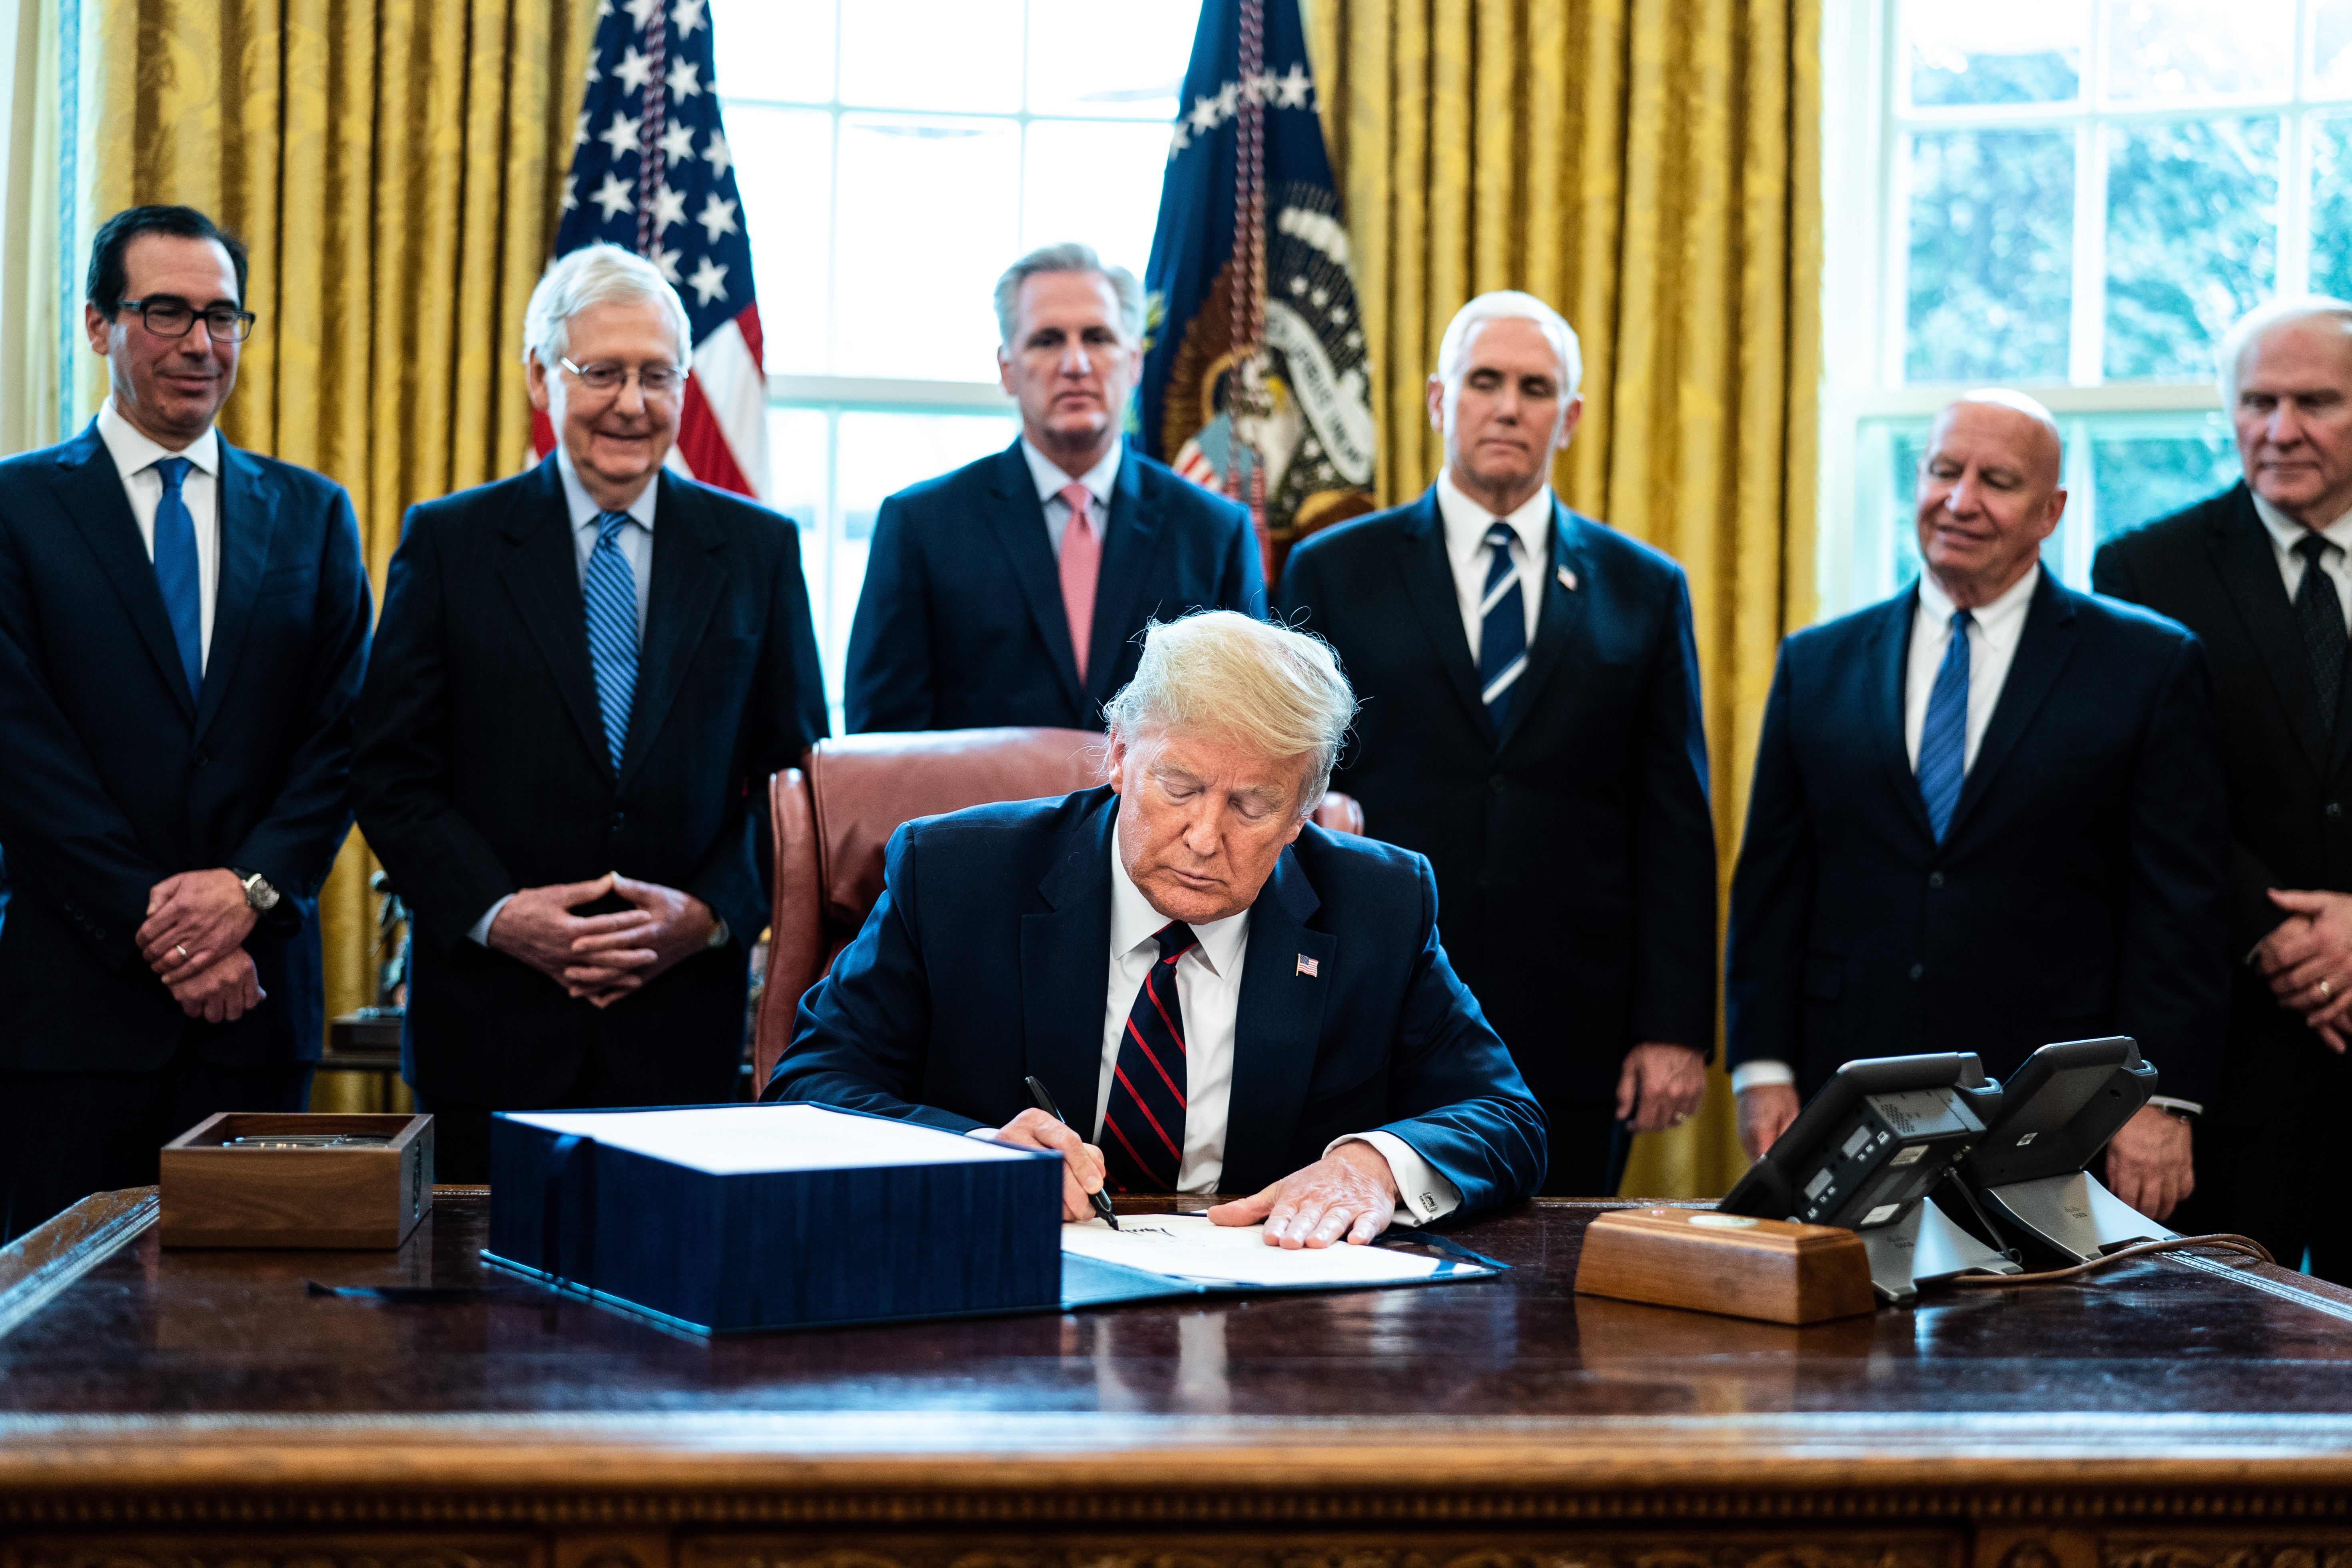 President Donald Trump signs H.R. 748, the CARES Act in the Oval Office of the White House on March 27, 2020 in Washington, DC. (Photo: Erin Schaff-Pool/Getty Images)